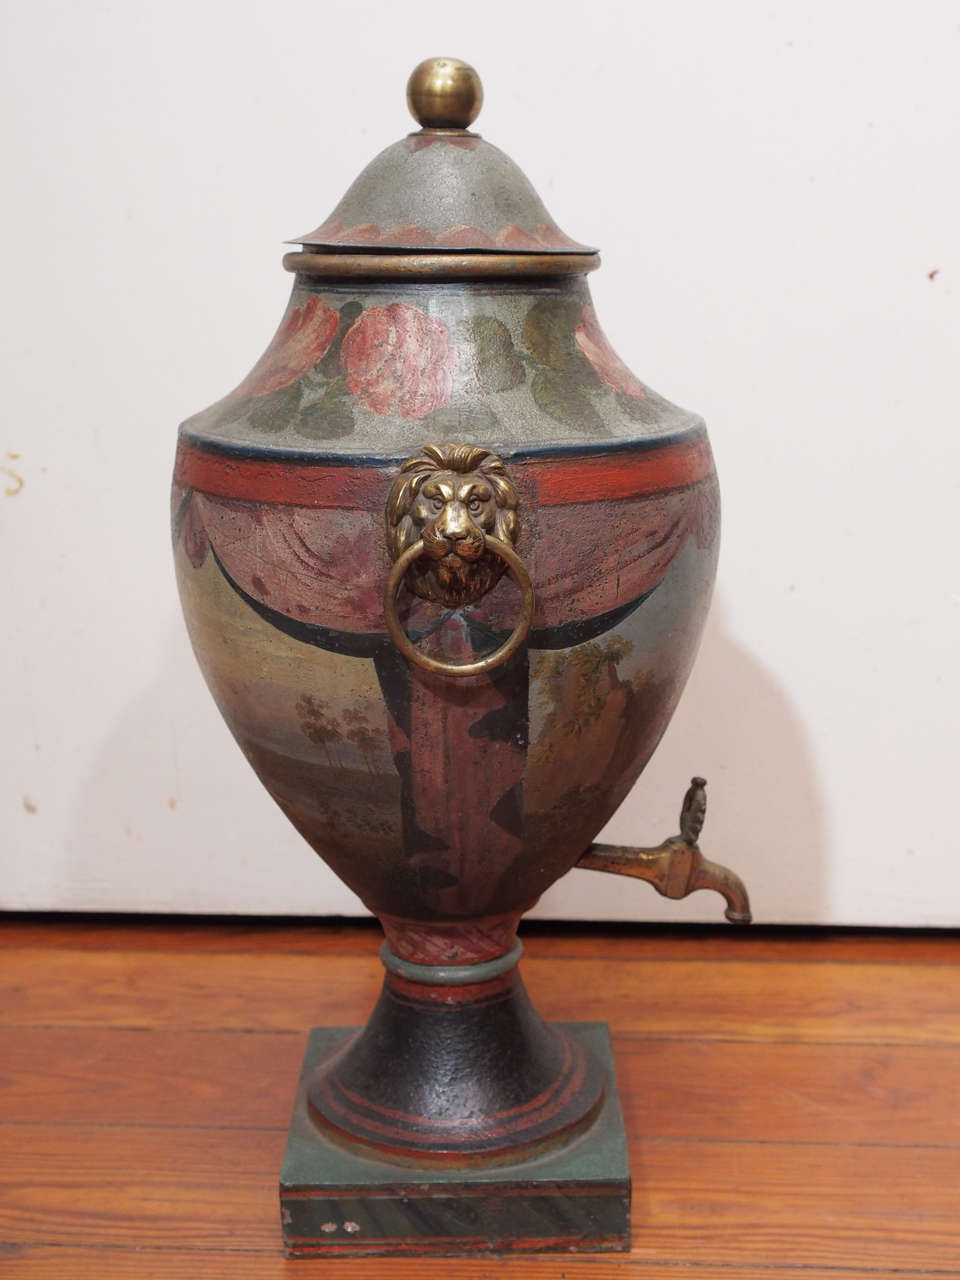 18th century painted tole lidded hot water urn with brass spigot and ringed lion handles.